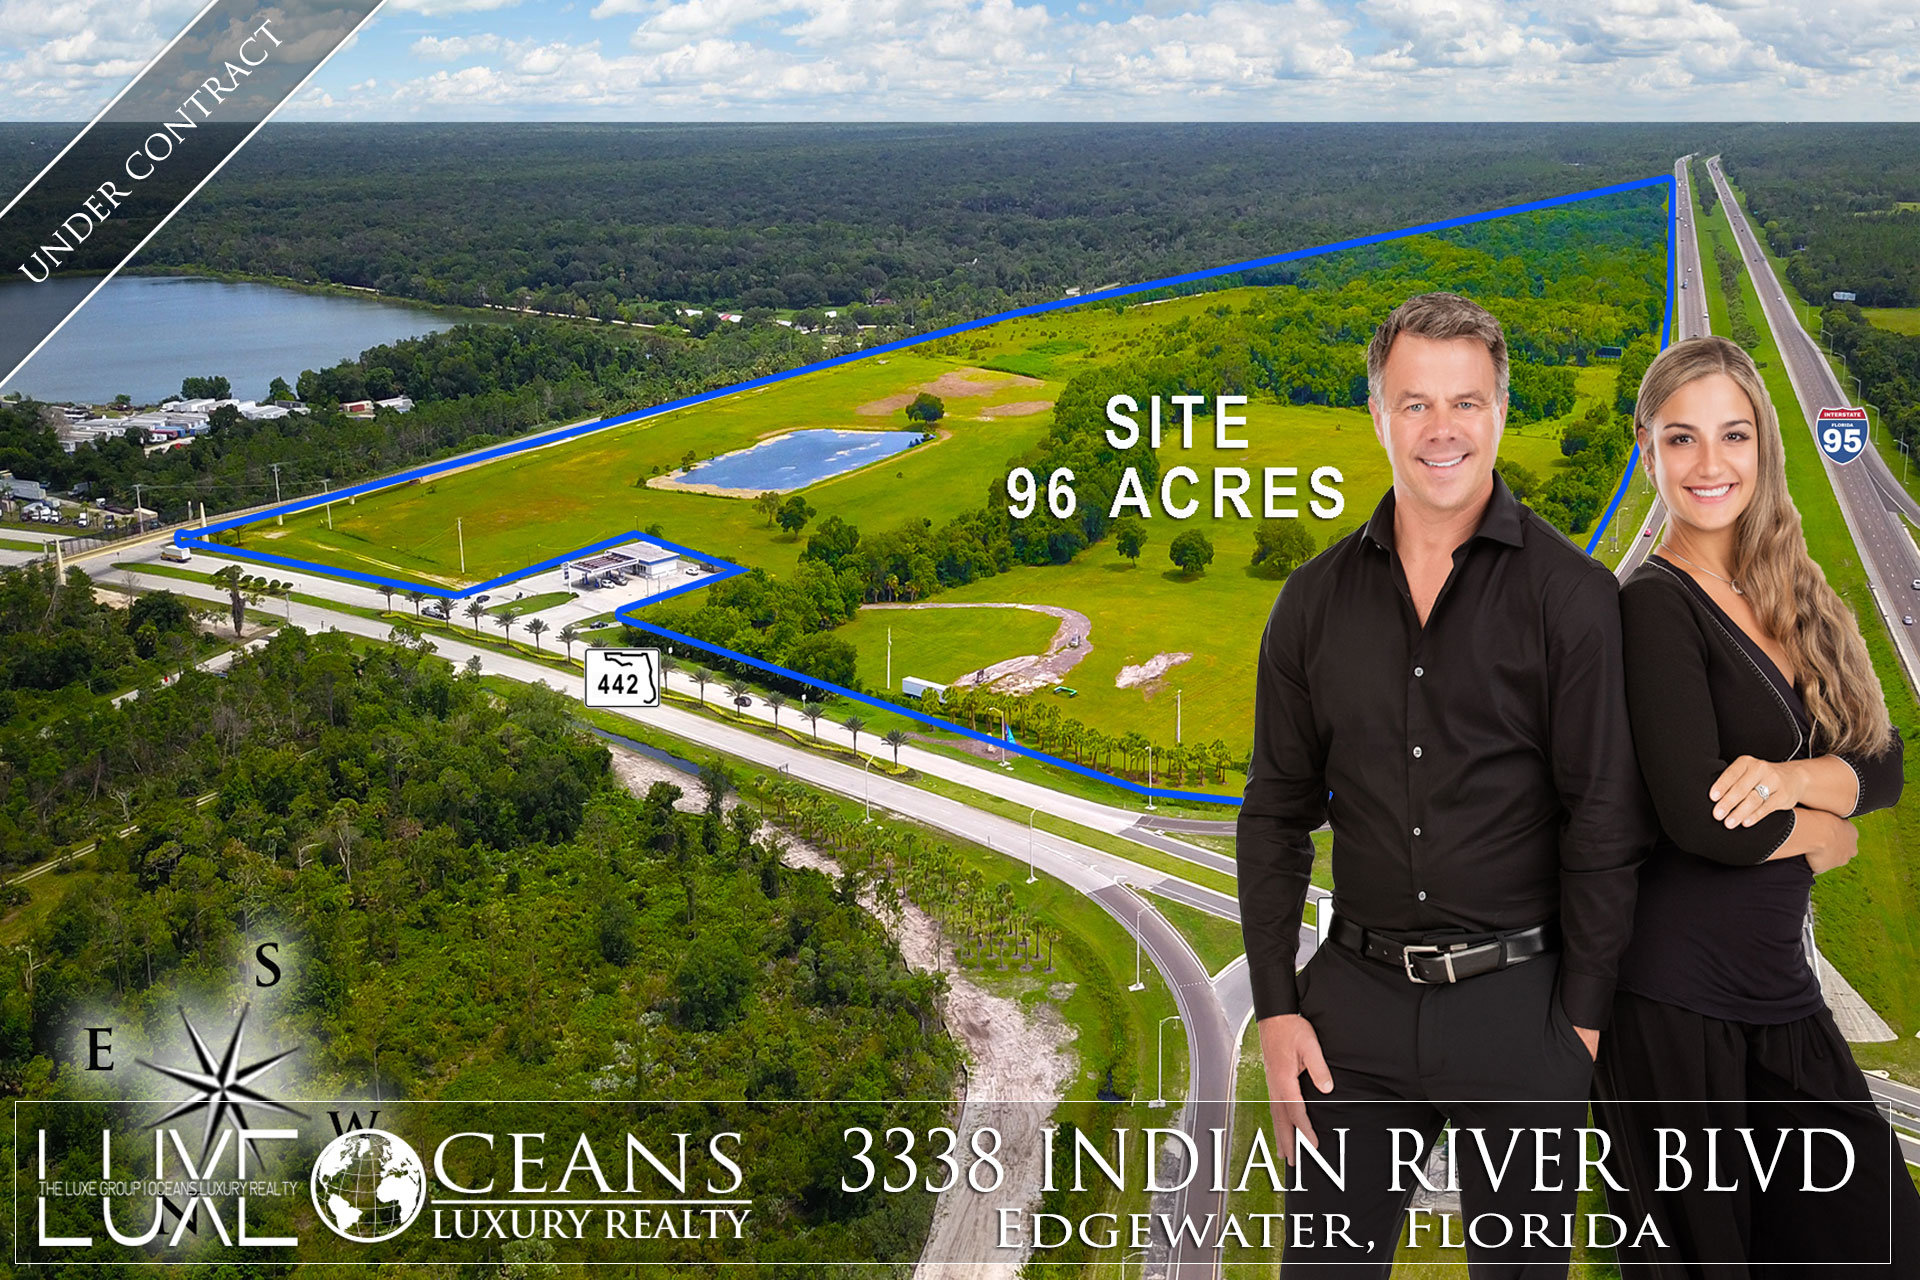 Commercial Land Mix Use PUD For Sale. Now Under Contract -  3338 Indian River Blvd, Edgewater, FL